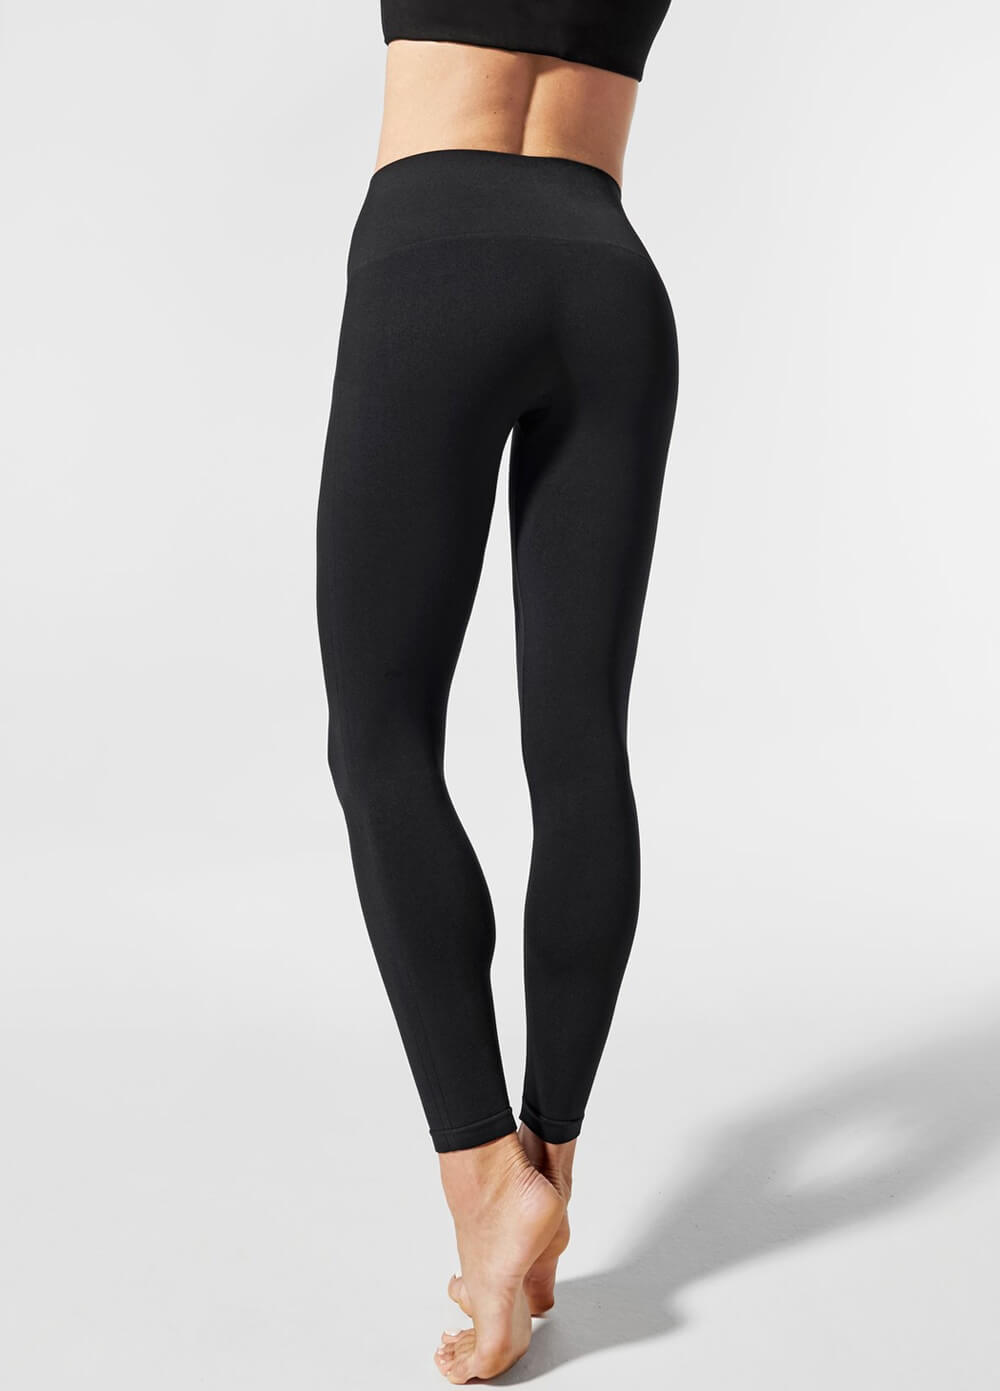 Blanqi - Everyday Hipster Support Leggings in Black